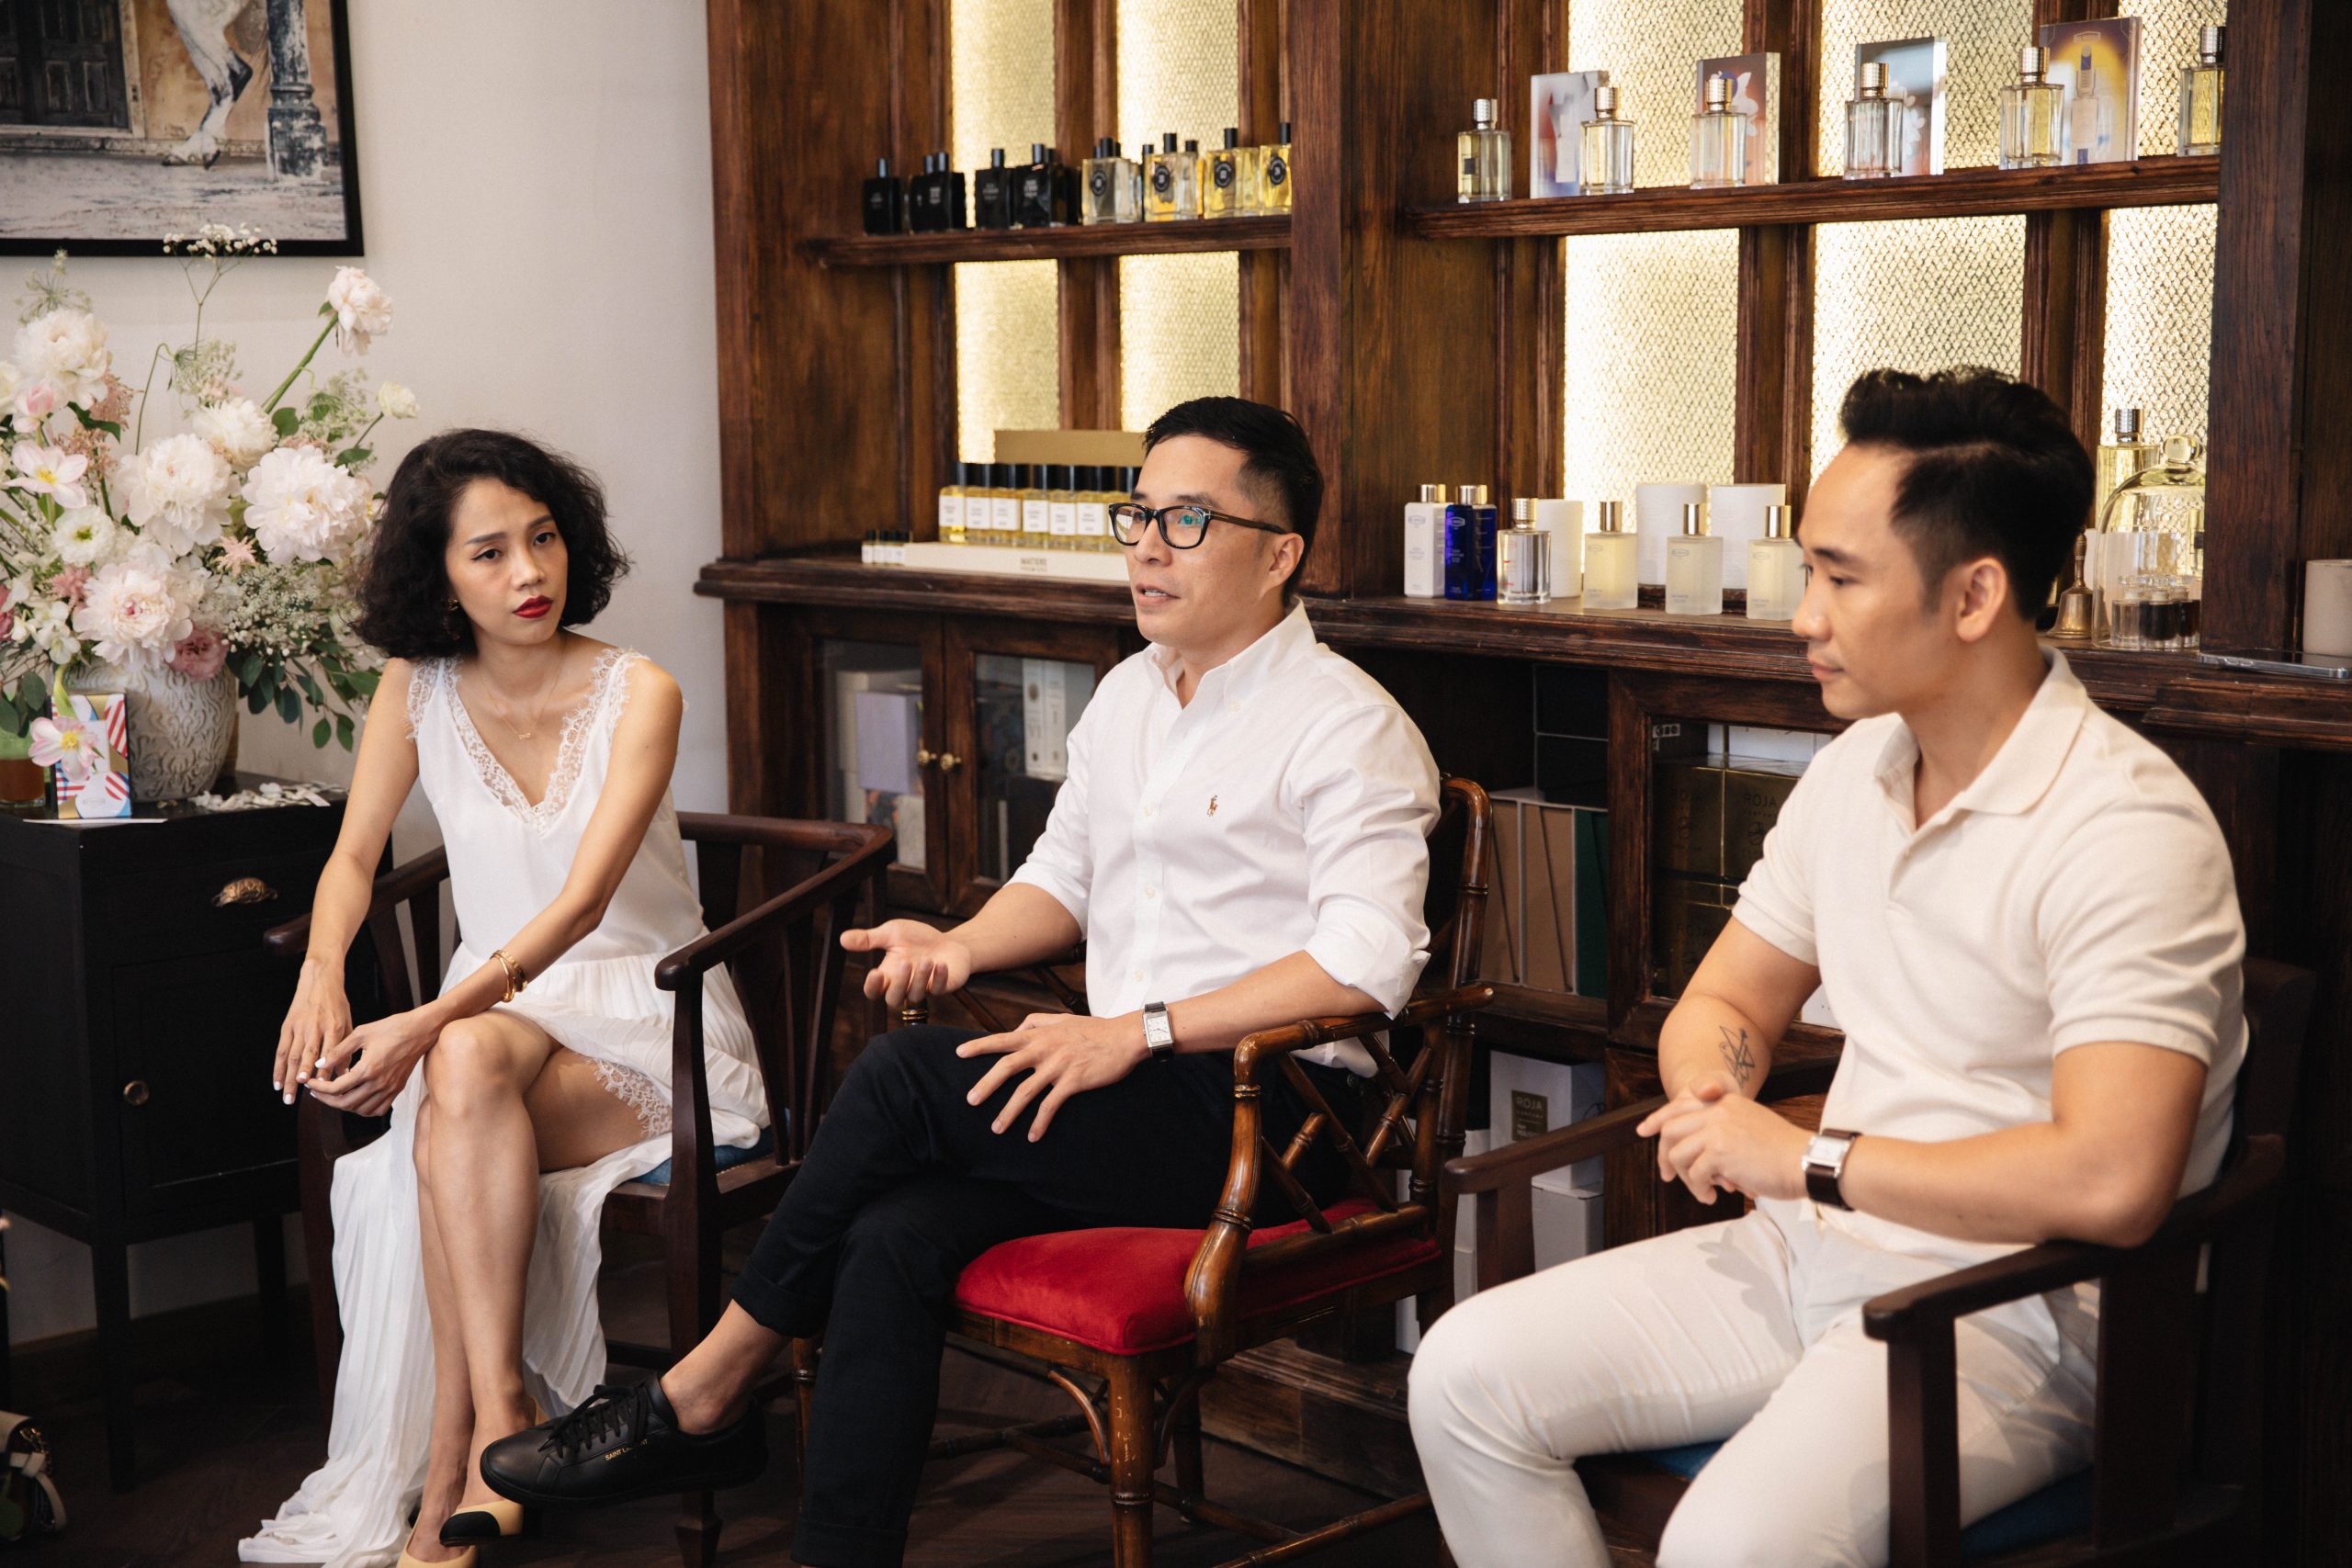 Mr. Eric Tran - Founder of ViinRiic Niche Perfume Gallery (middle) shares about the unique fragrance of In Paradise Riviera